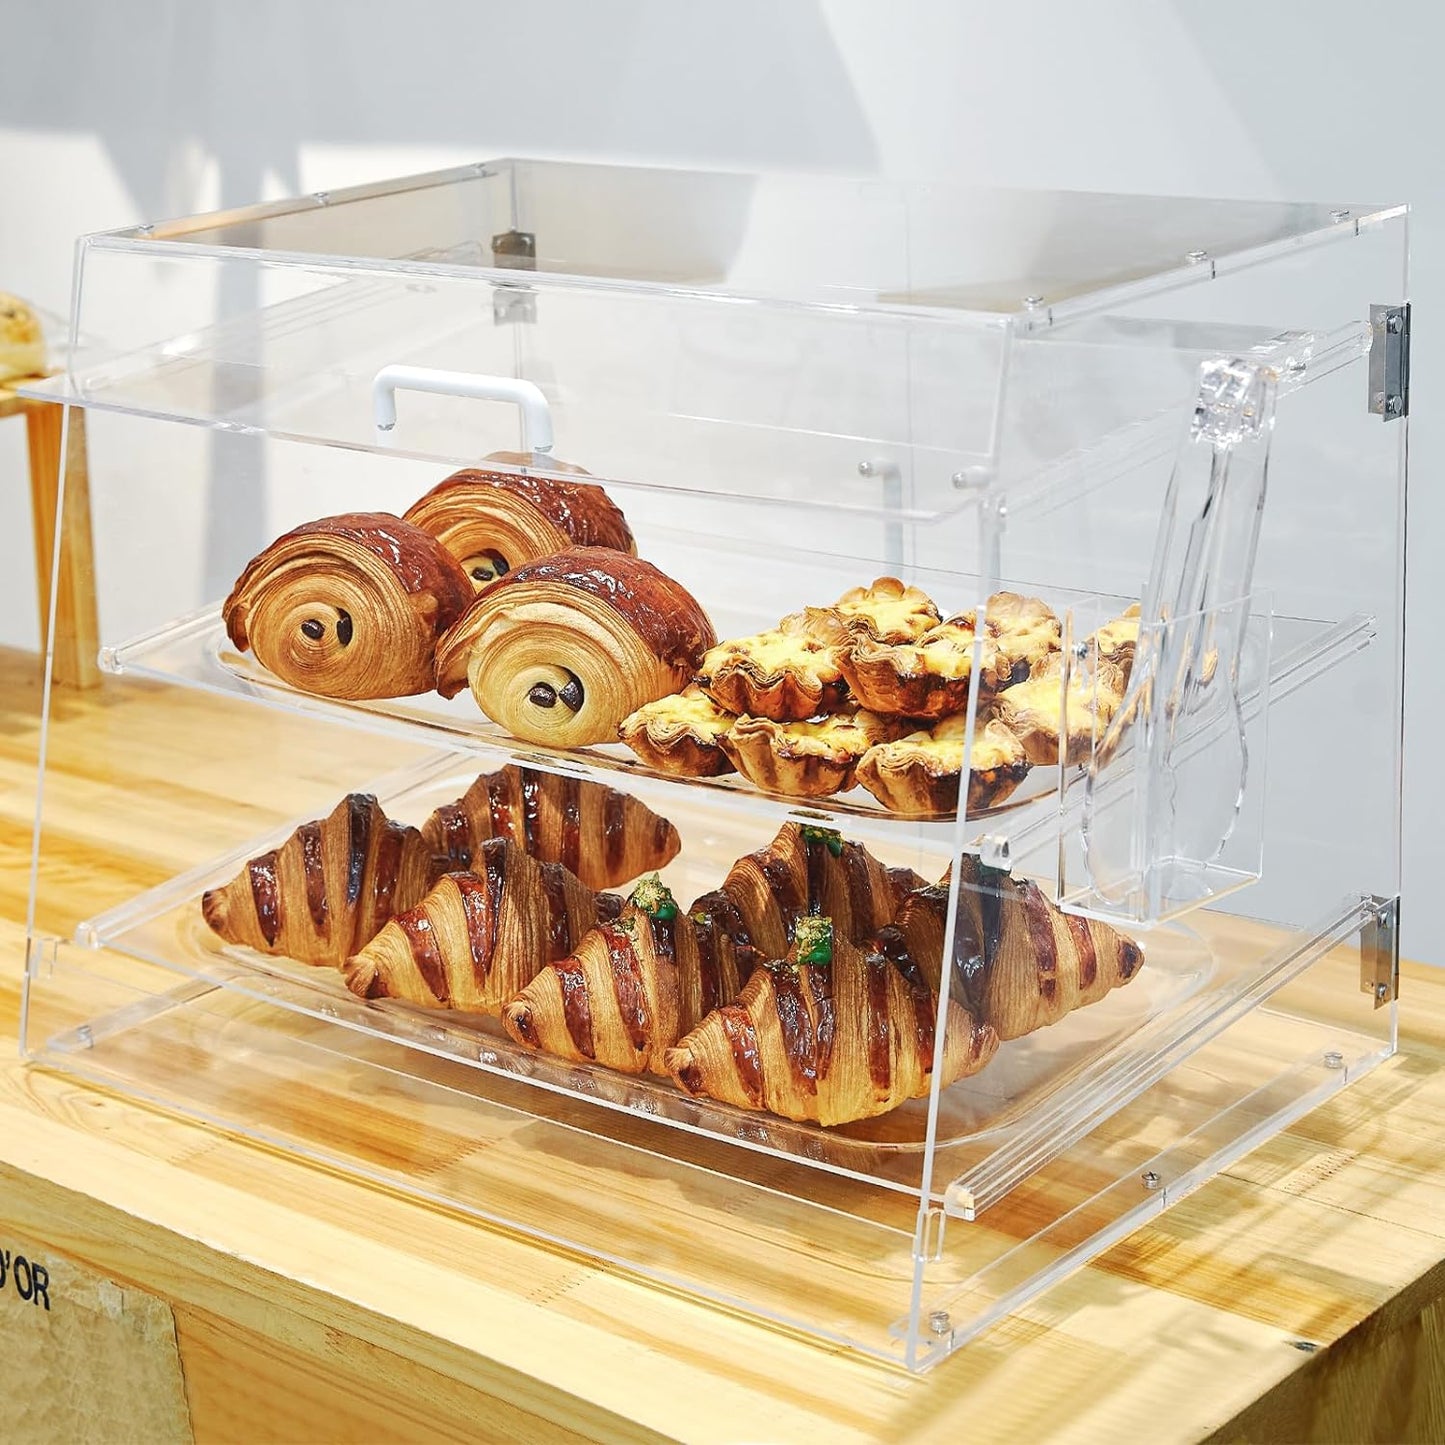 2 Tray Commercial Countertop Bakery Display Case 21.6" x 15.7" x 15.7" Acrylic Pastry Display Case with Serving Tong, Bread Display Case with Front & Rear Doors (2 Tier, 21.6" x 15.7" x 15.7")